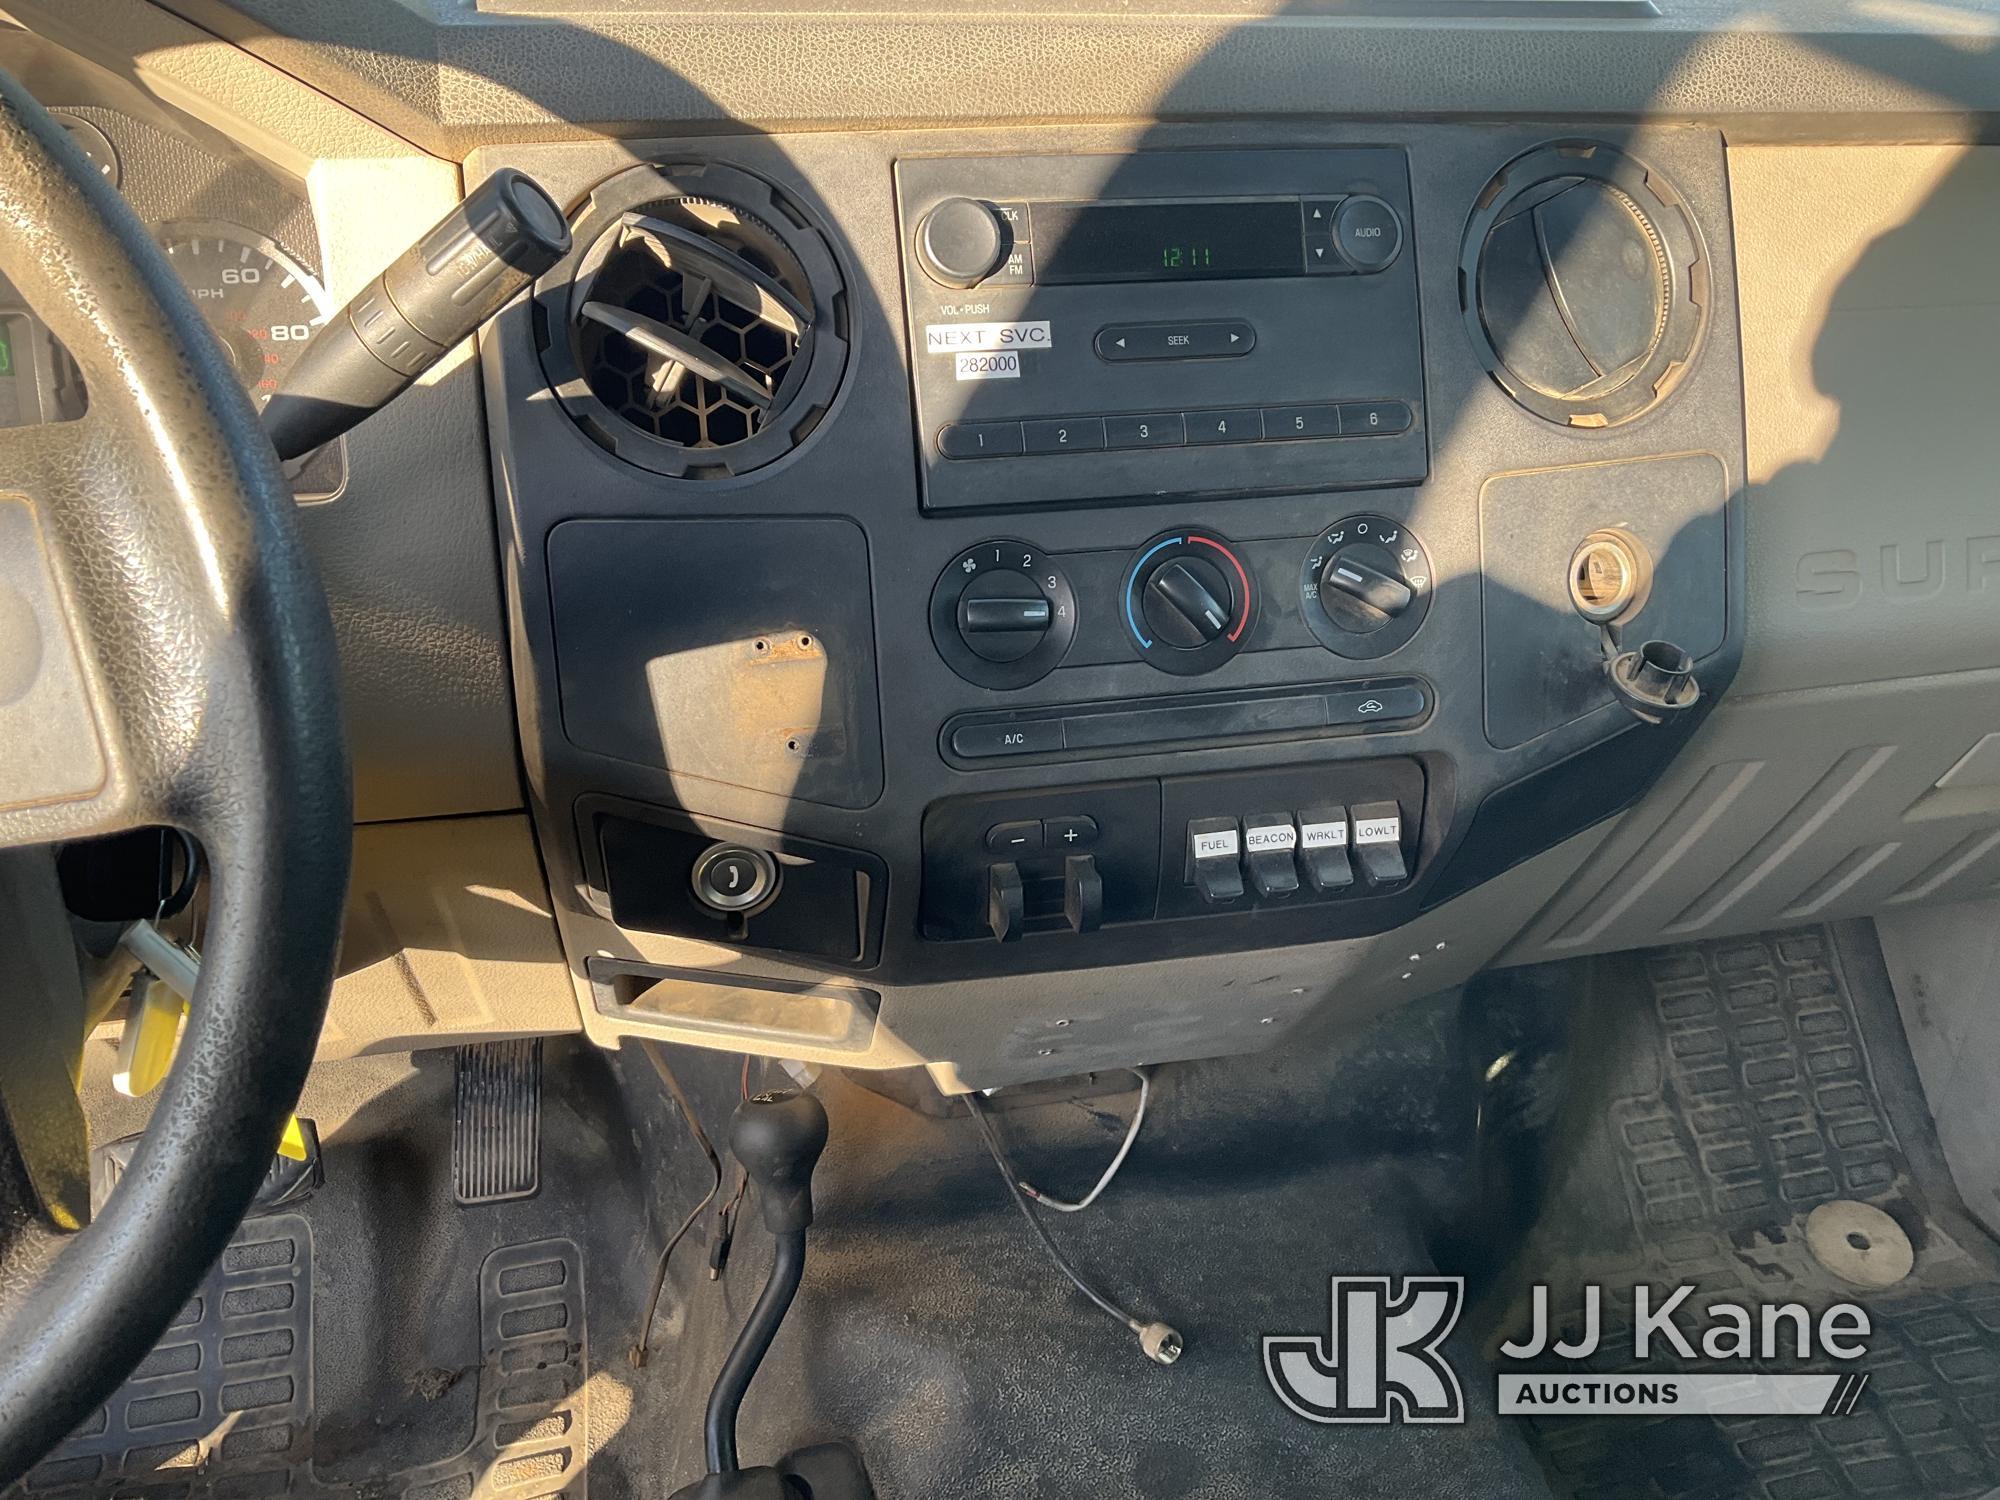 (Dixon, CA) 2009 Ford F350 4x4 Crew-Cab Pickup Truck Runs & Moves) (ABS Light Is On, Driver Side Mir